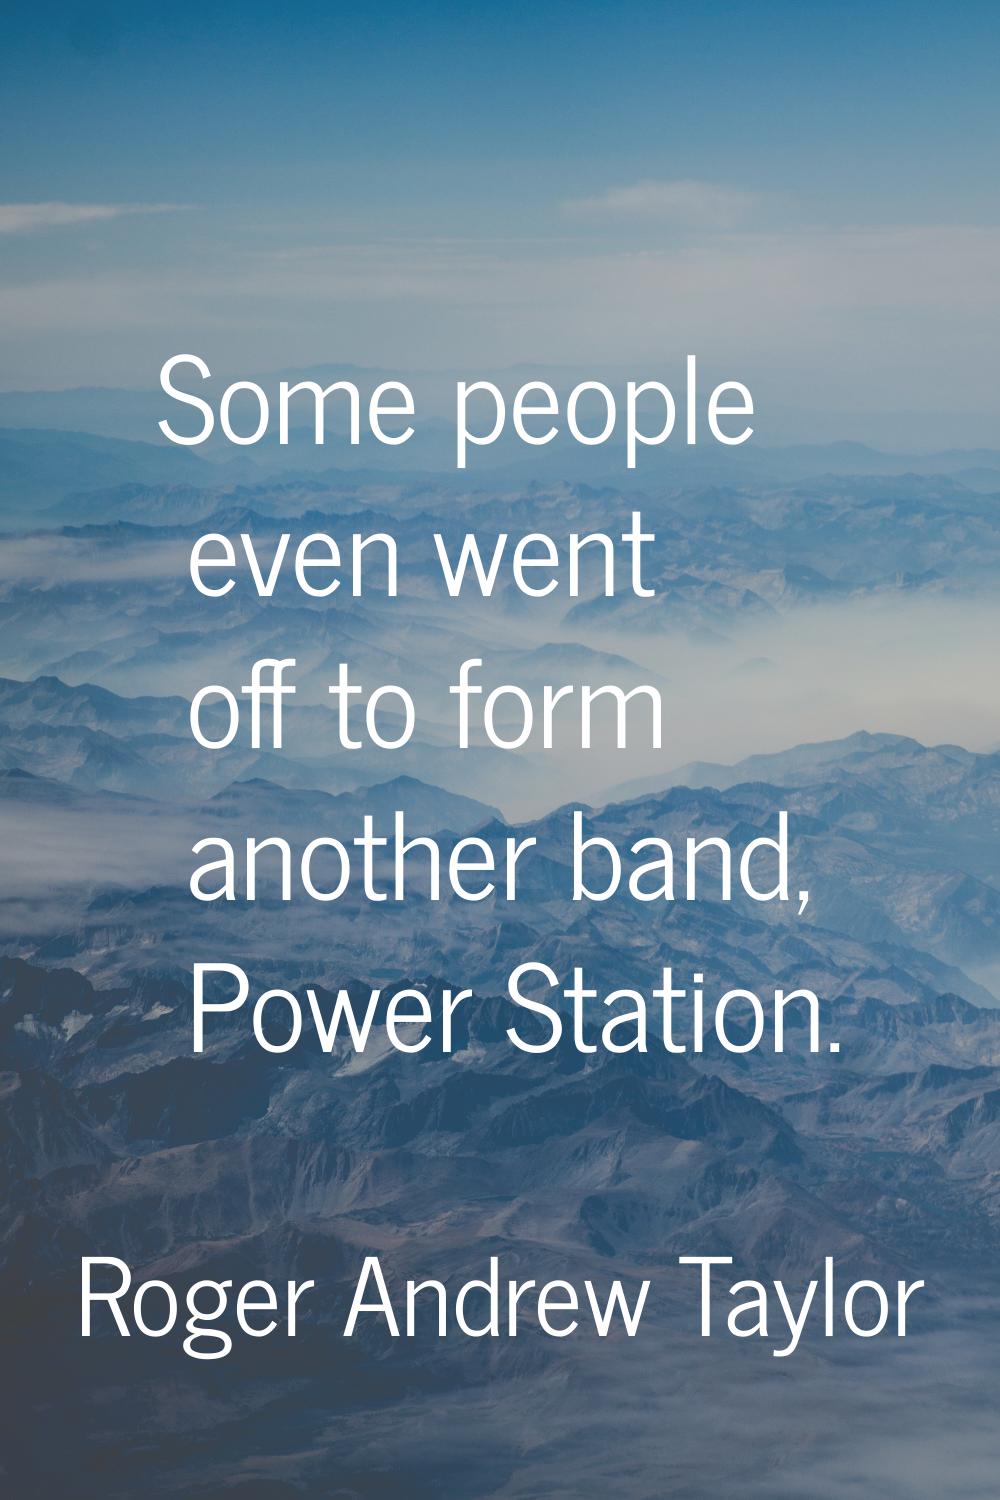 Some people even went off to form another band, Power Station.